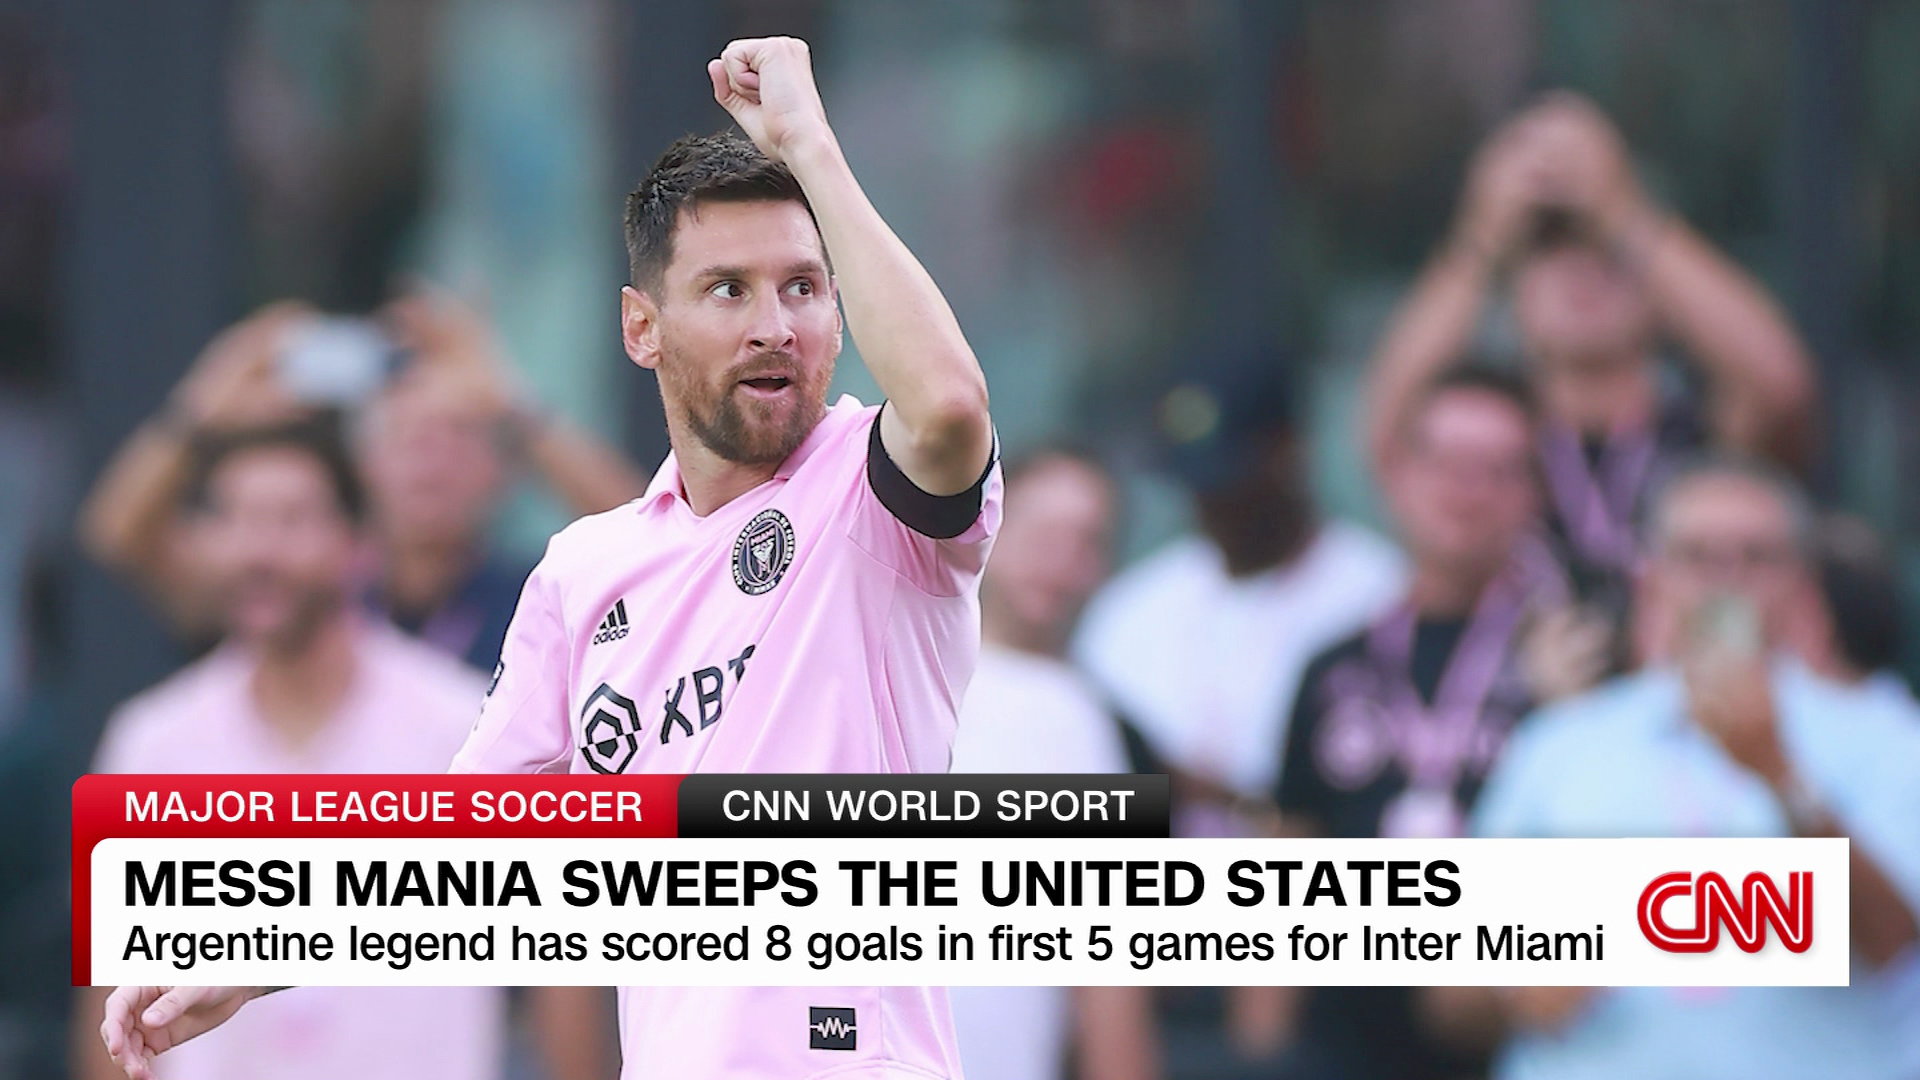 The Results of Messi Mania Are In